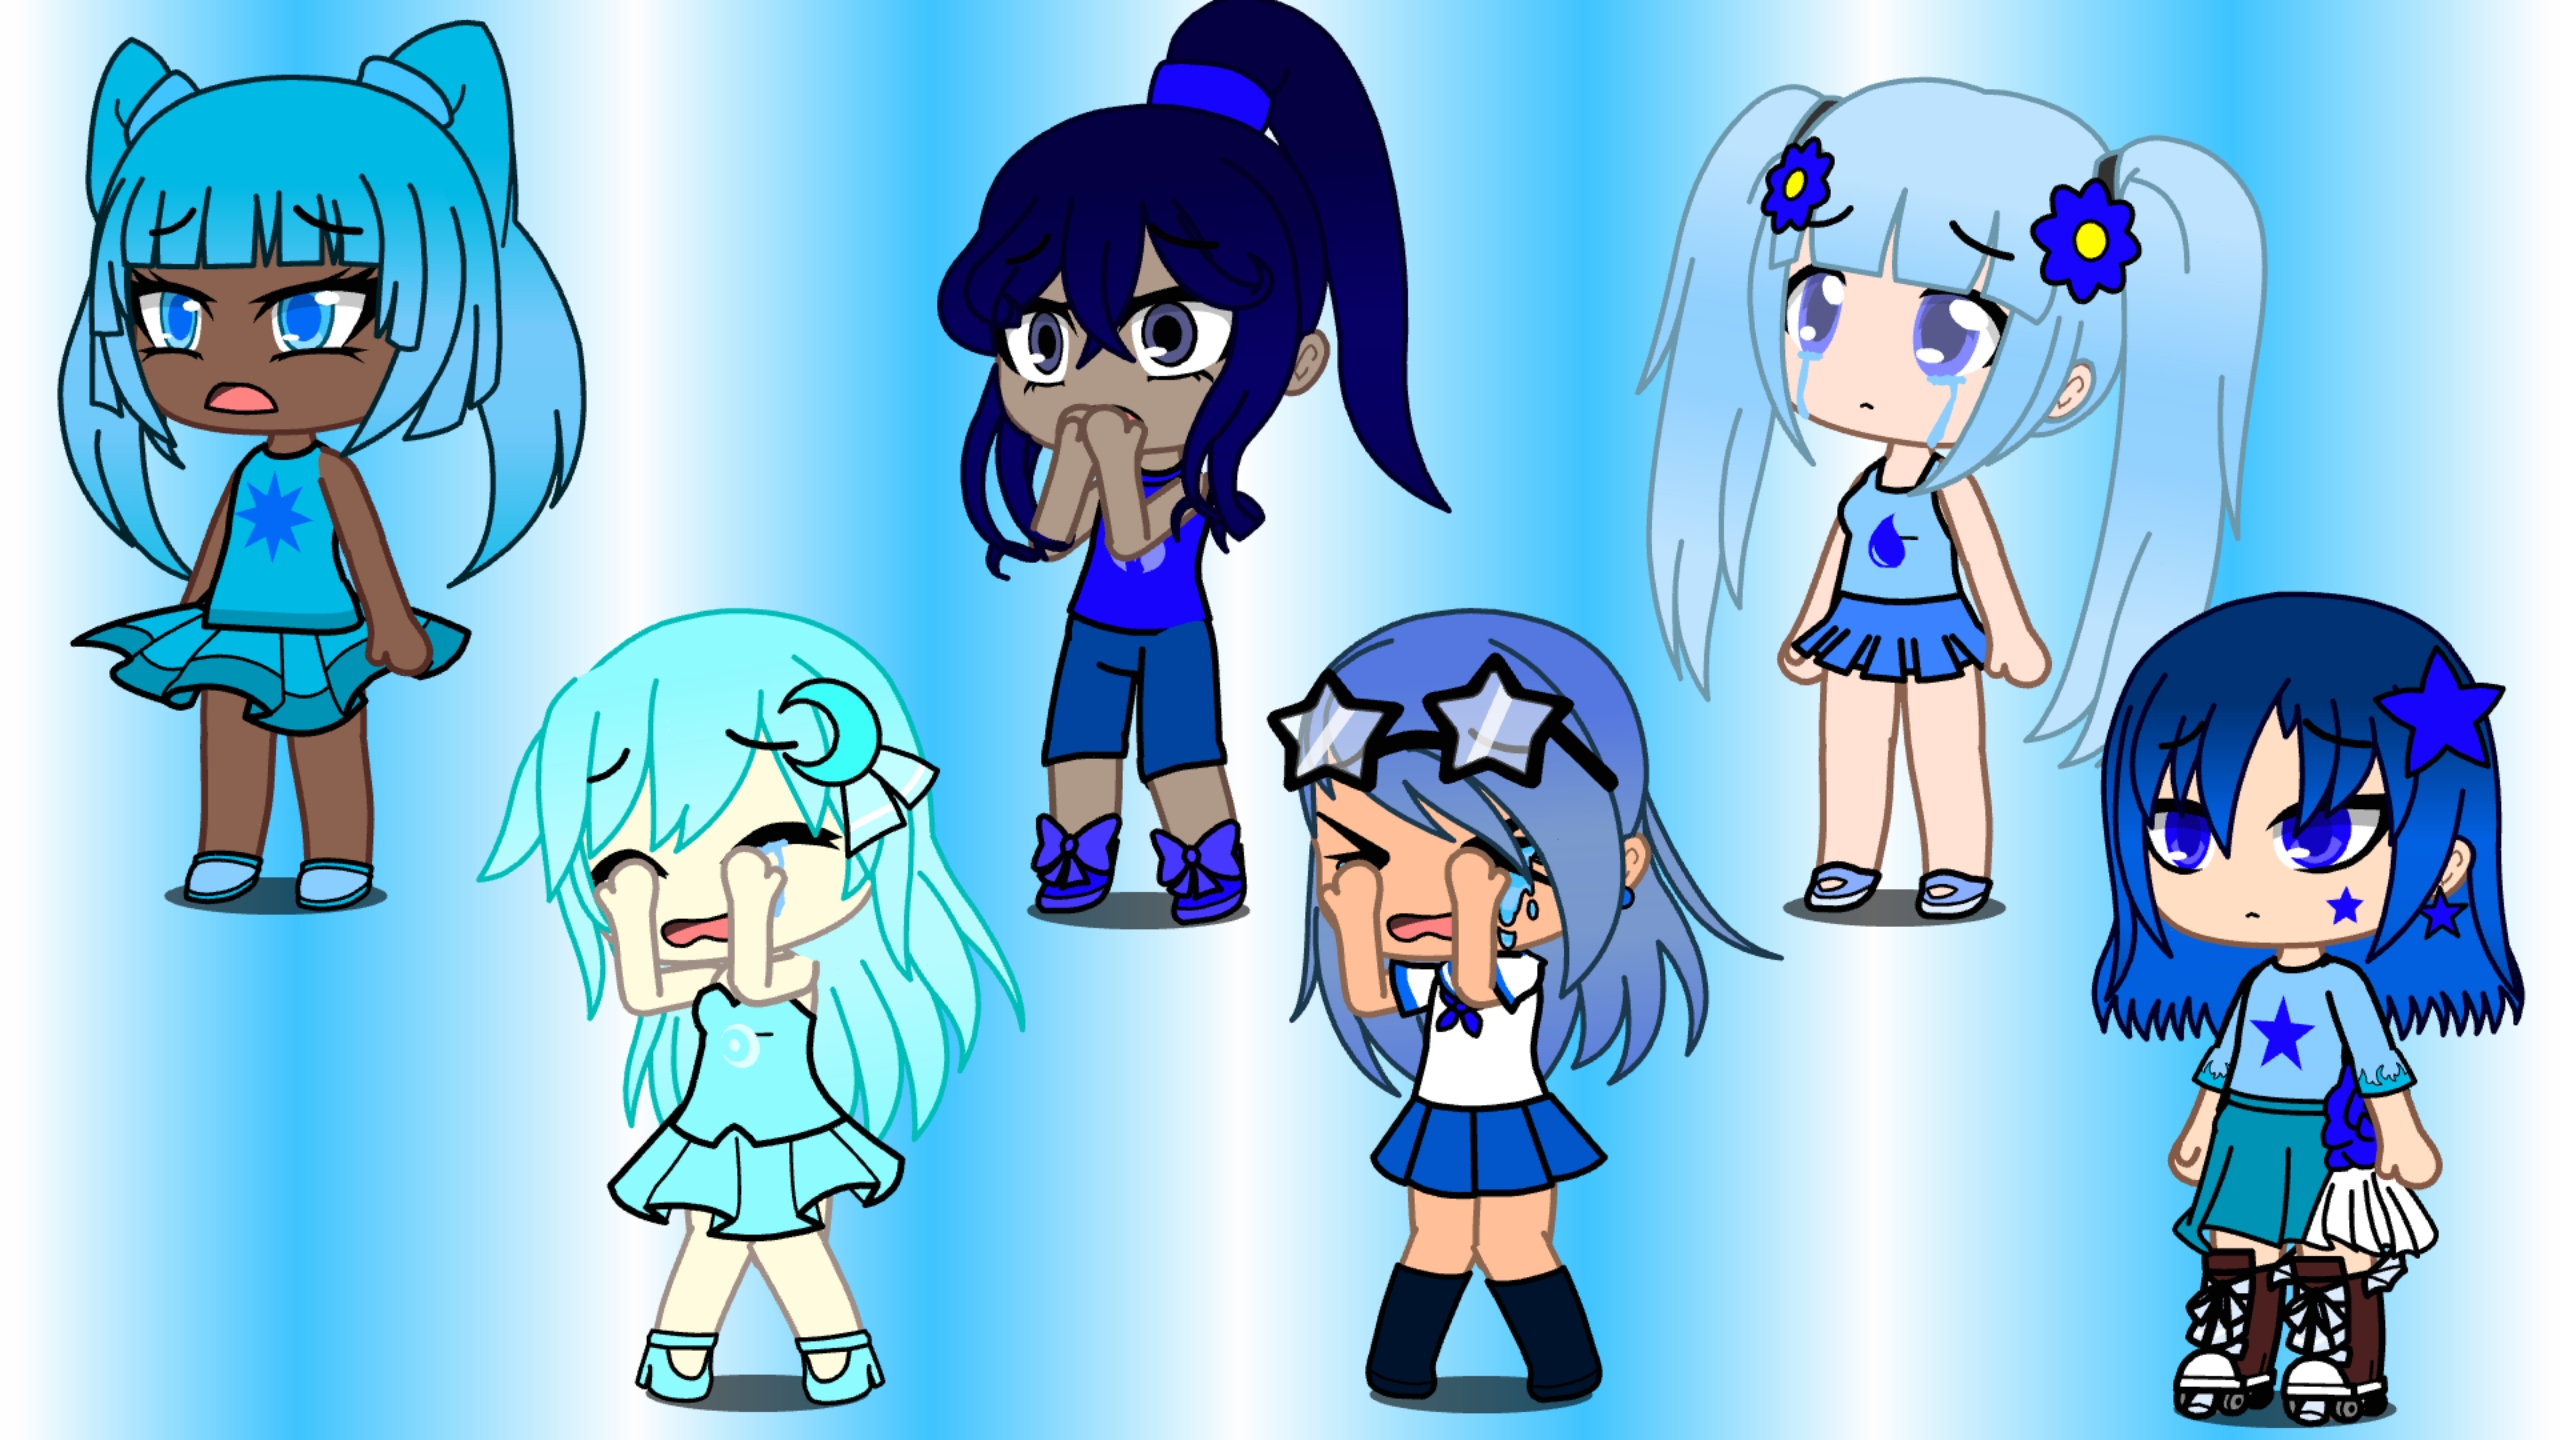 Gacha-ocs Q & Redic But More Sad PM You should be disappointed